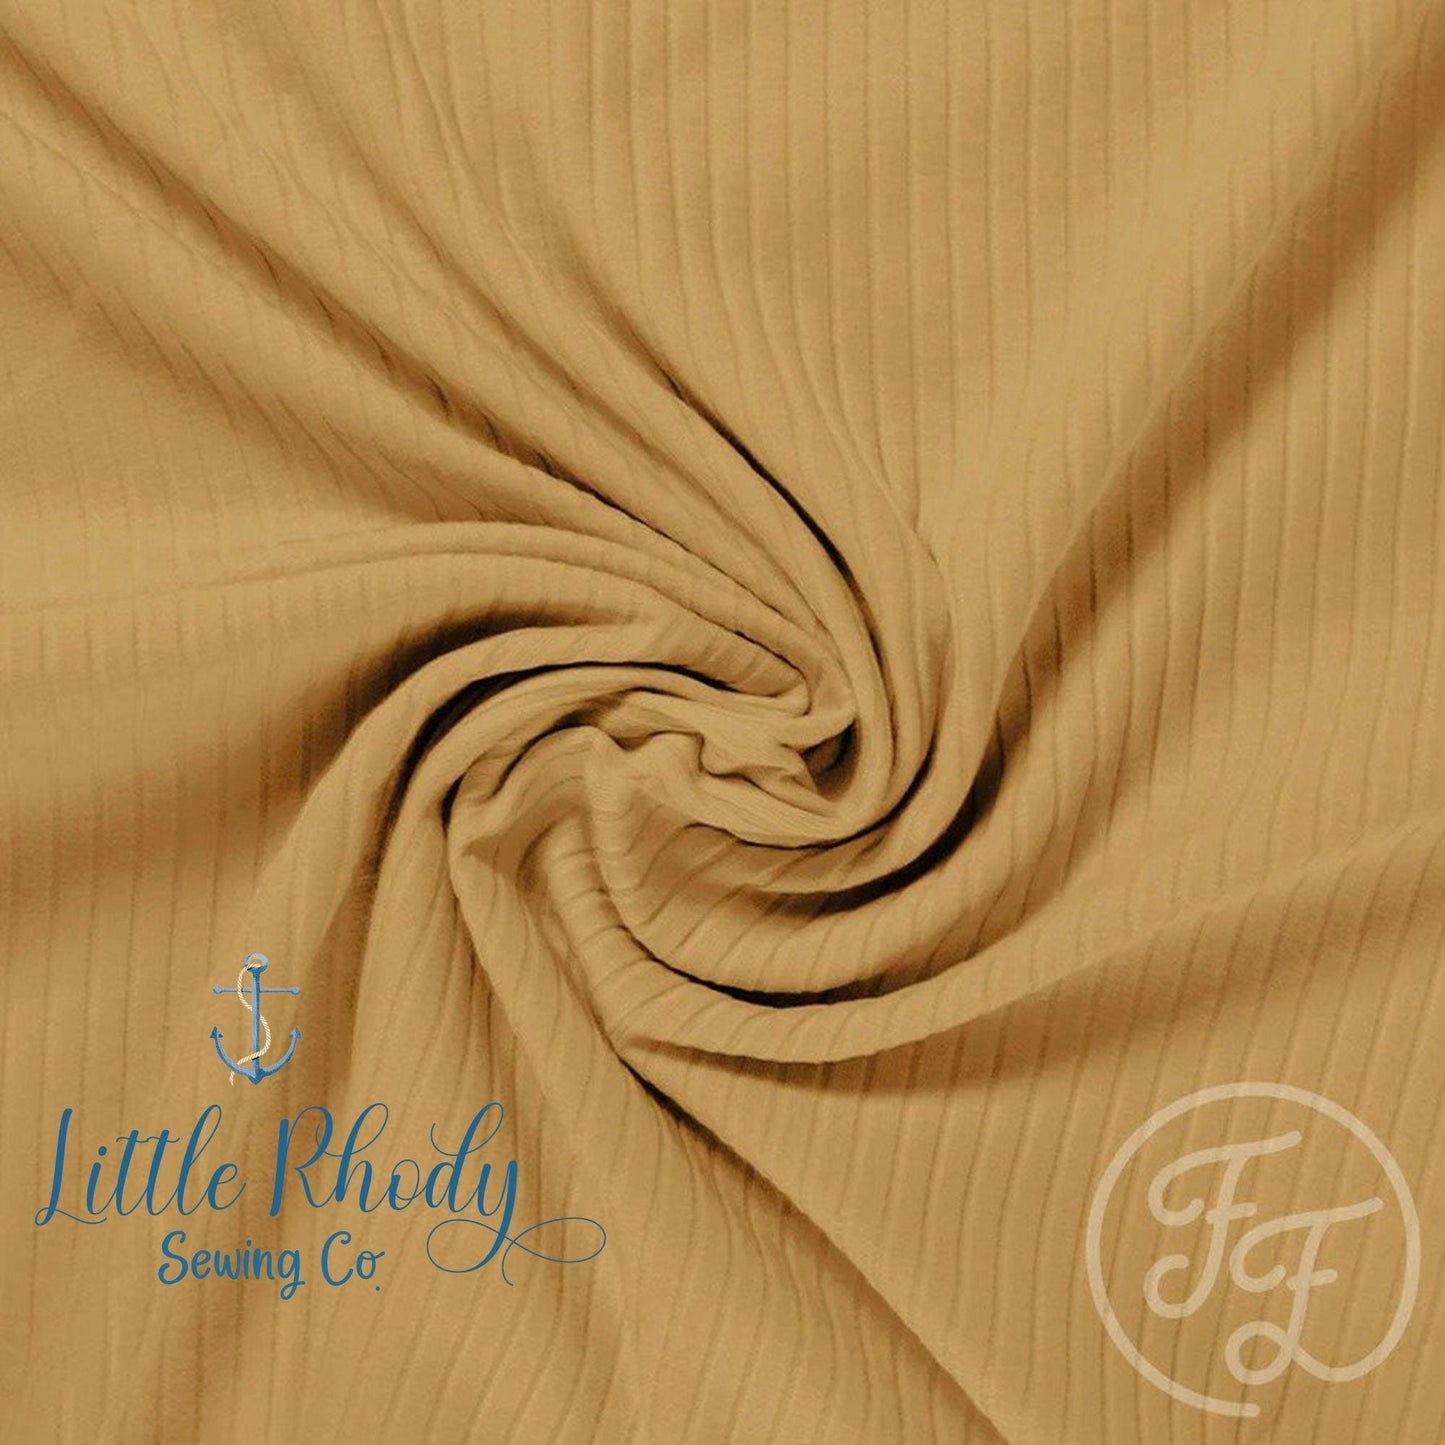 New Wheat - Wide Rib 8x4 - By the 1/2 Yard - Little Rhody Sewing Co.